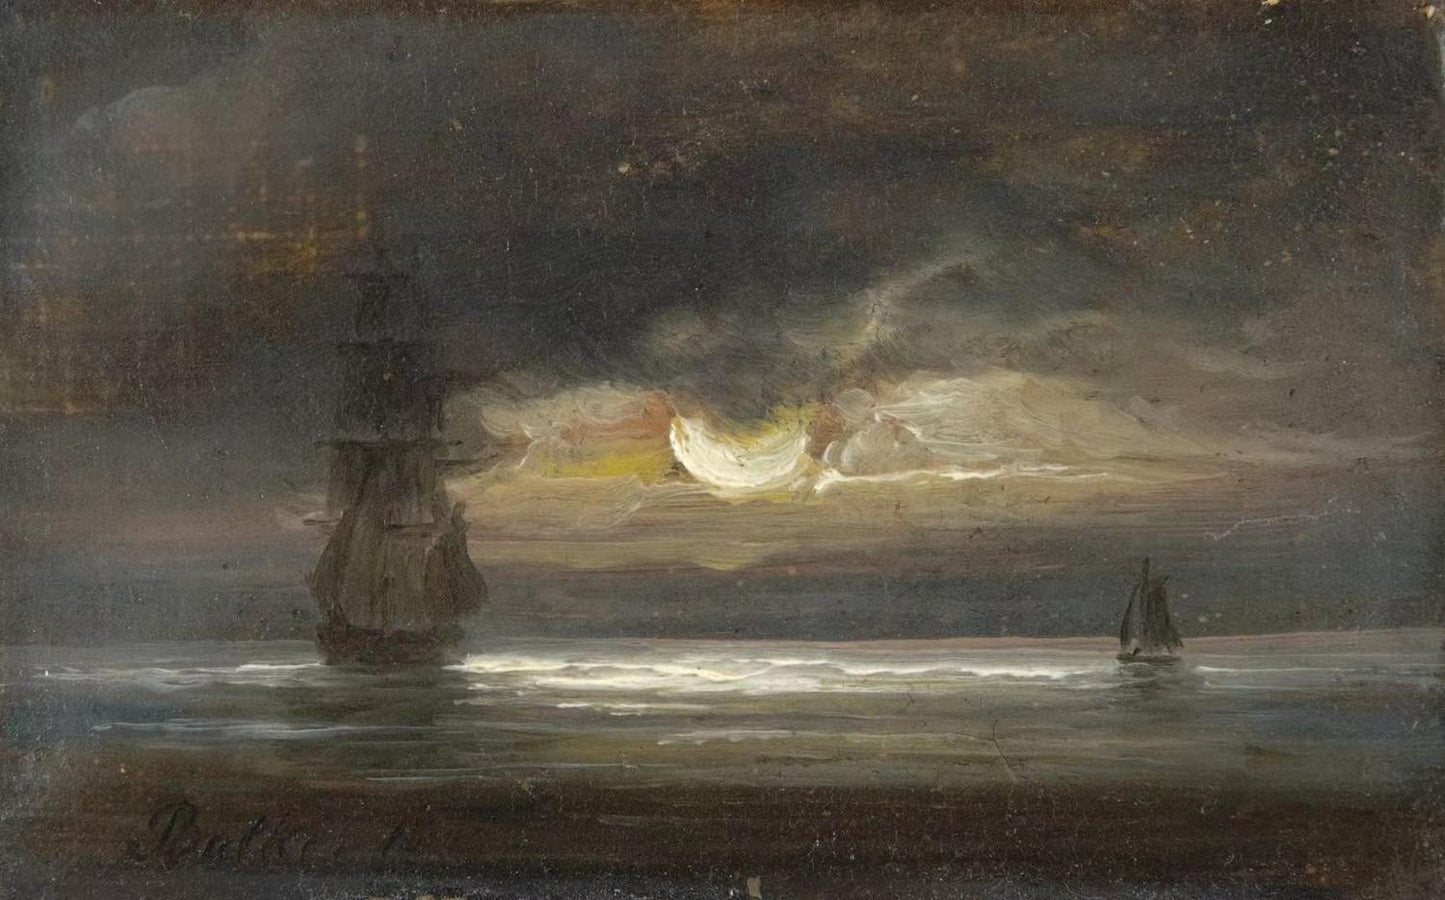 Two sailing boats by moonlight, Peder Balke,1804-1887